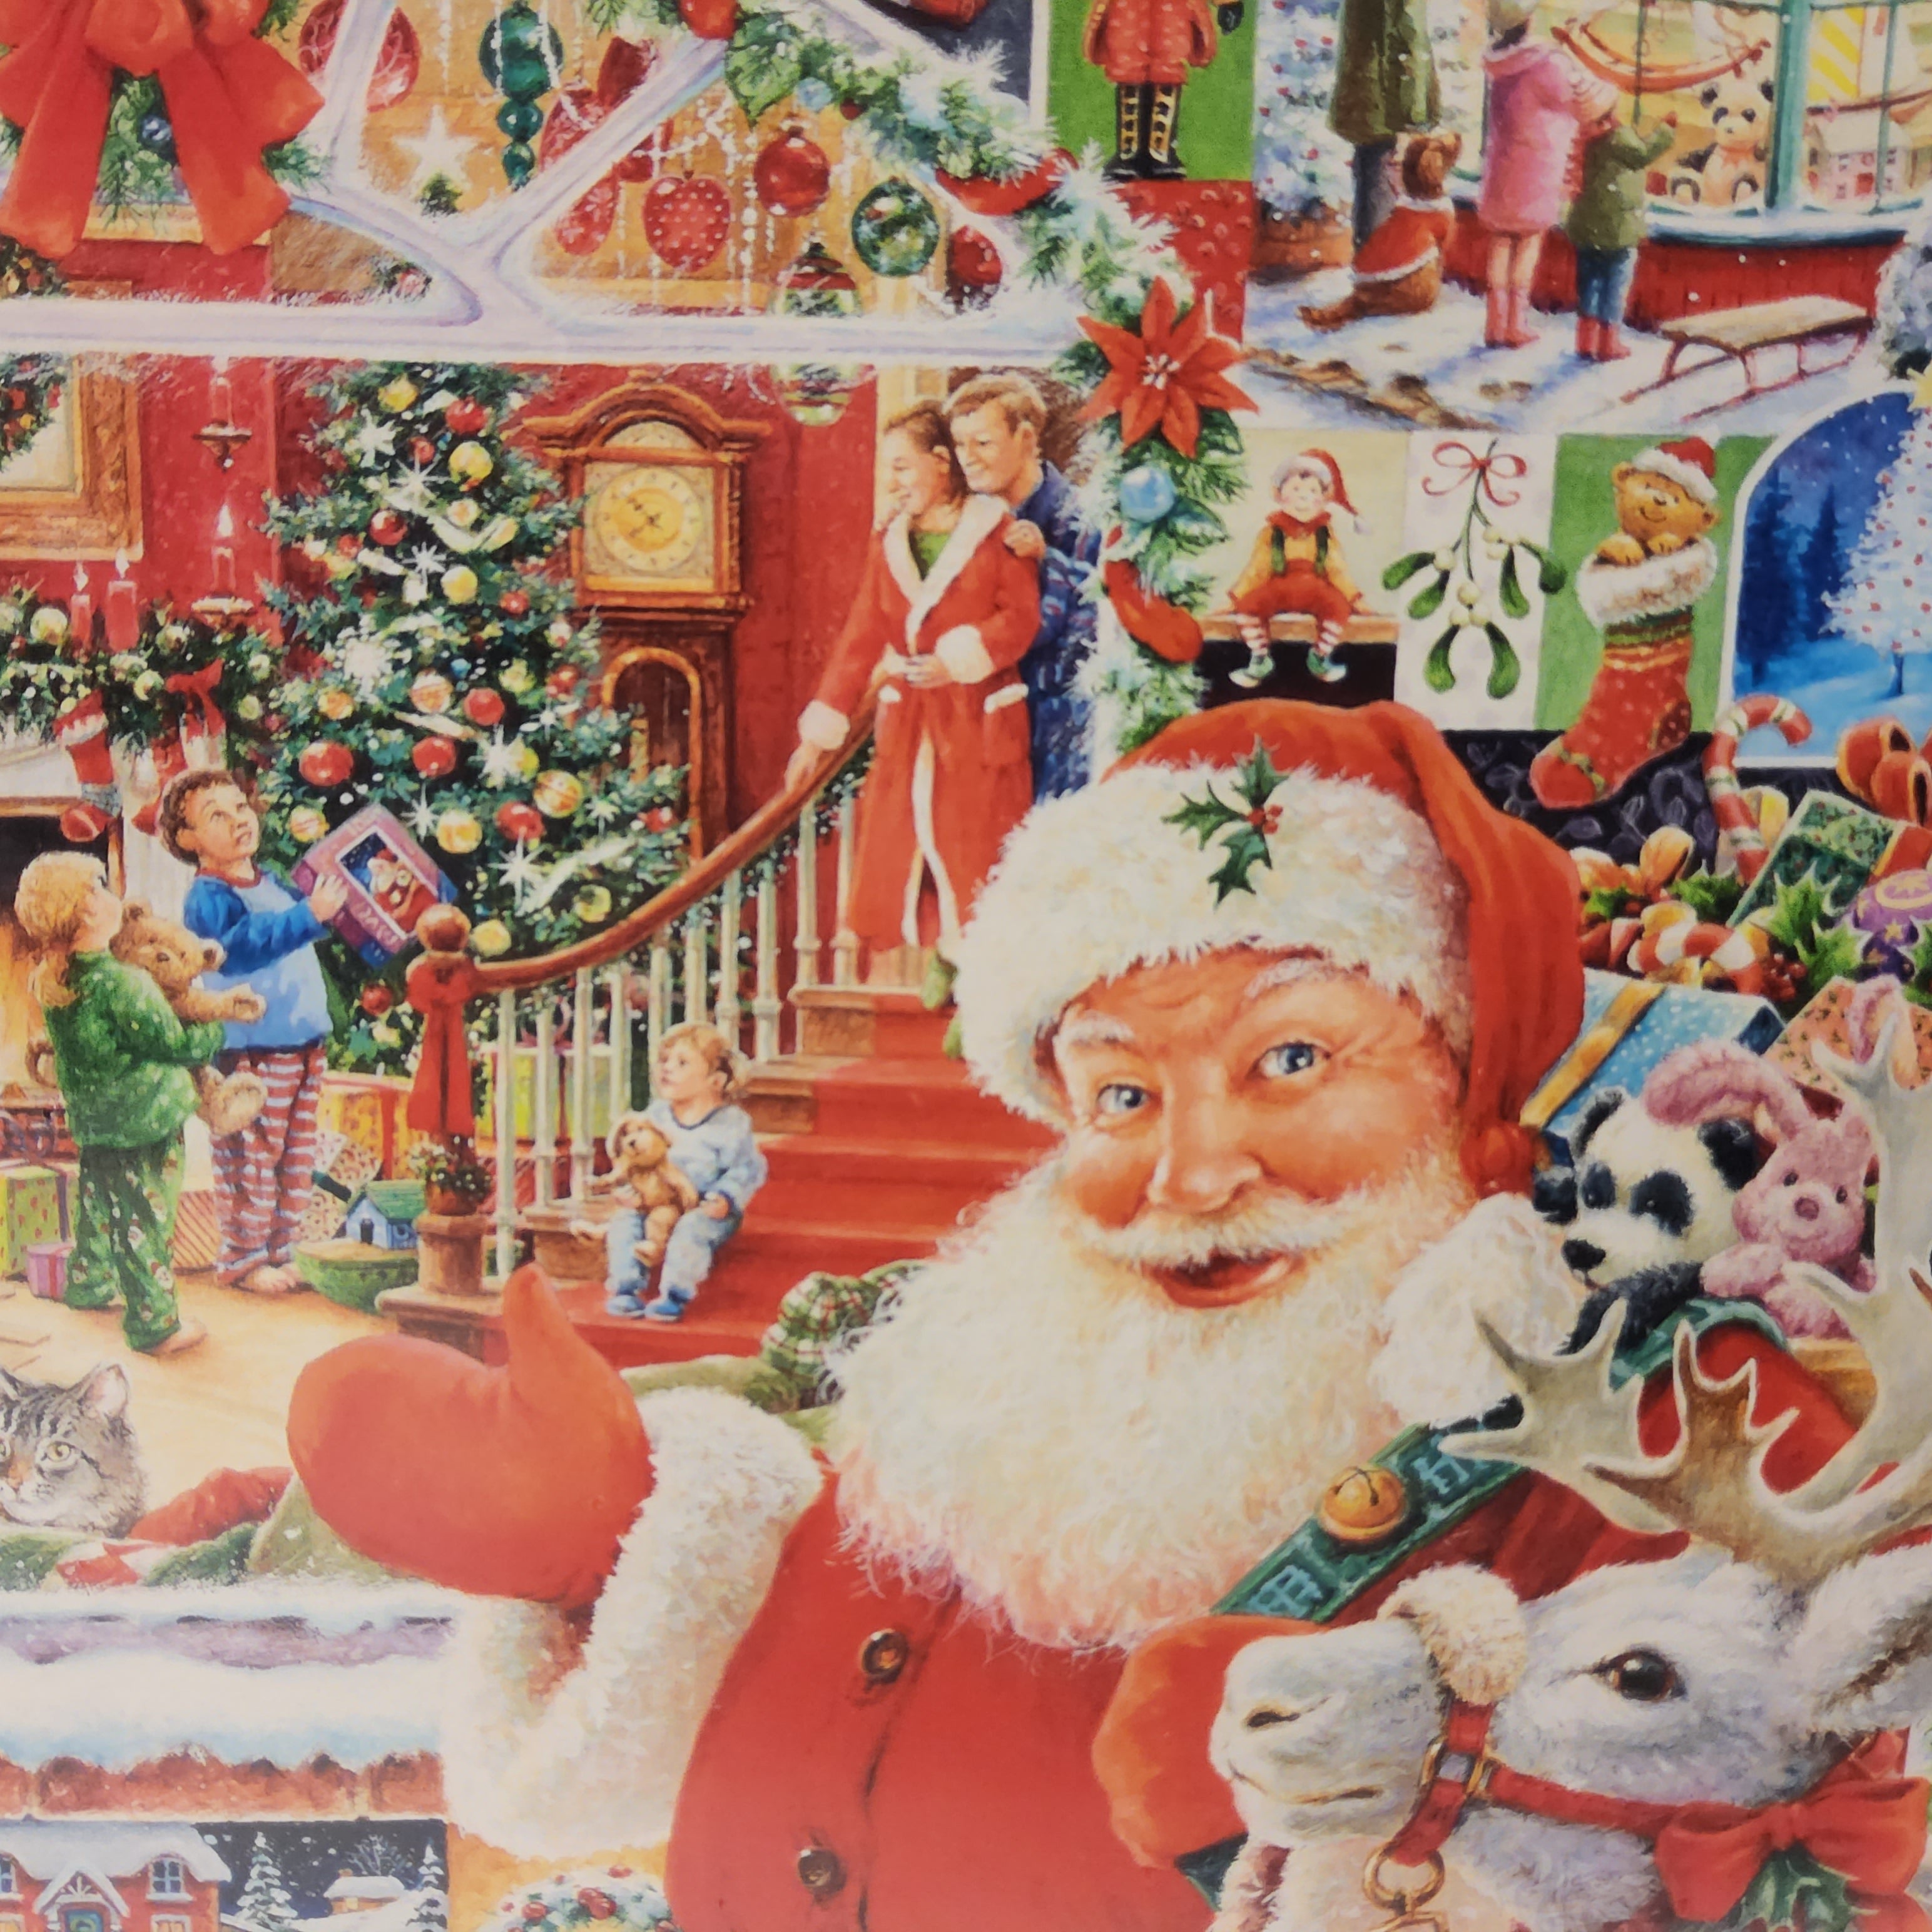 Ravensburger Puzzle - Christmas is Coming! - 1000 pieces - #16511